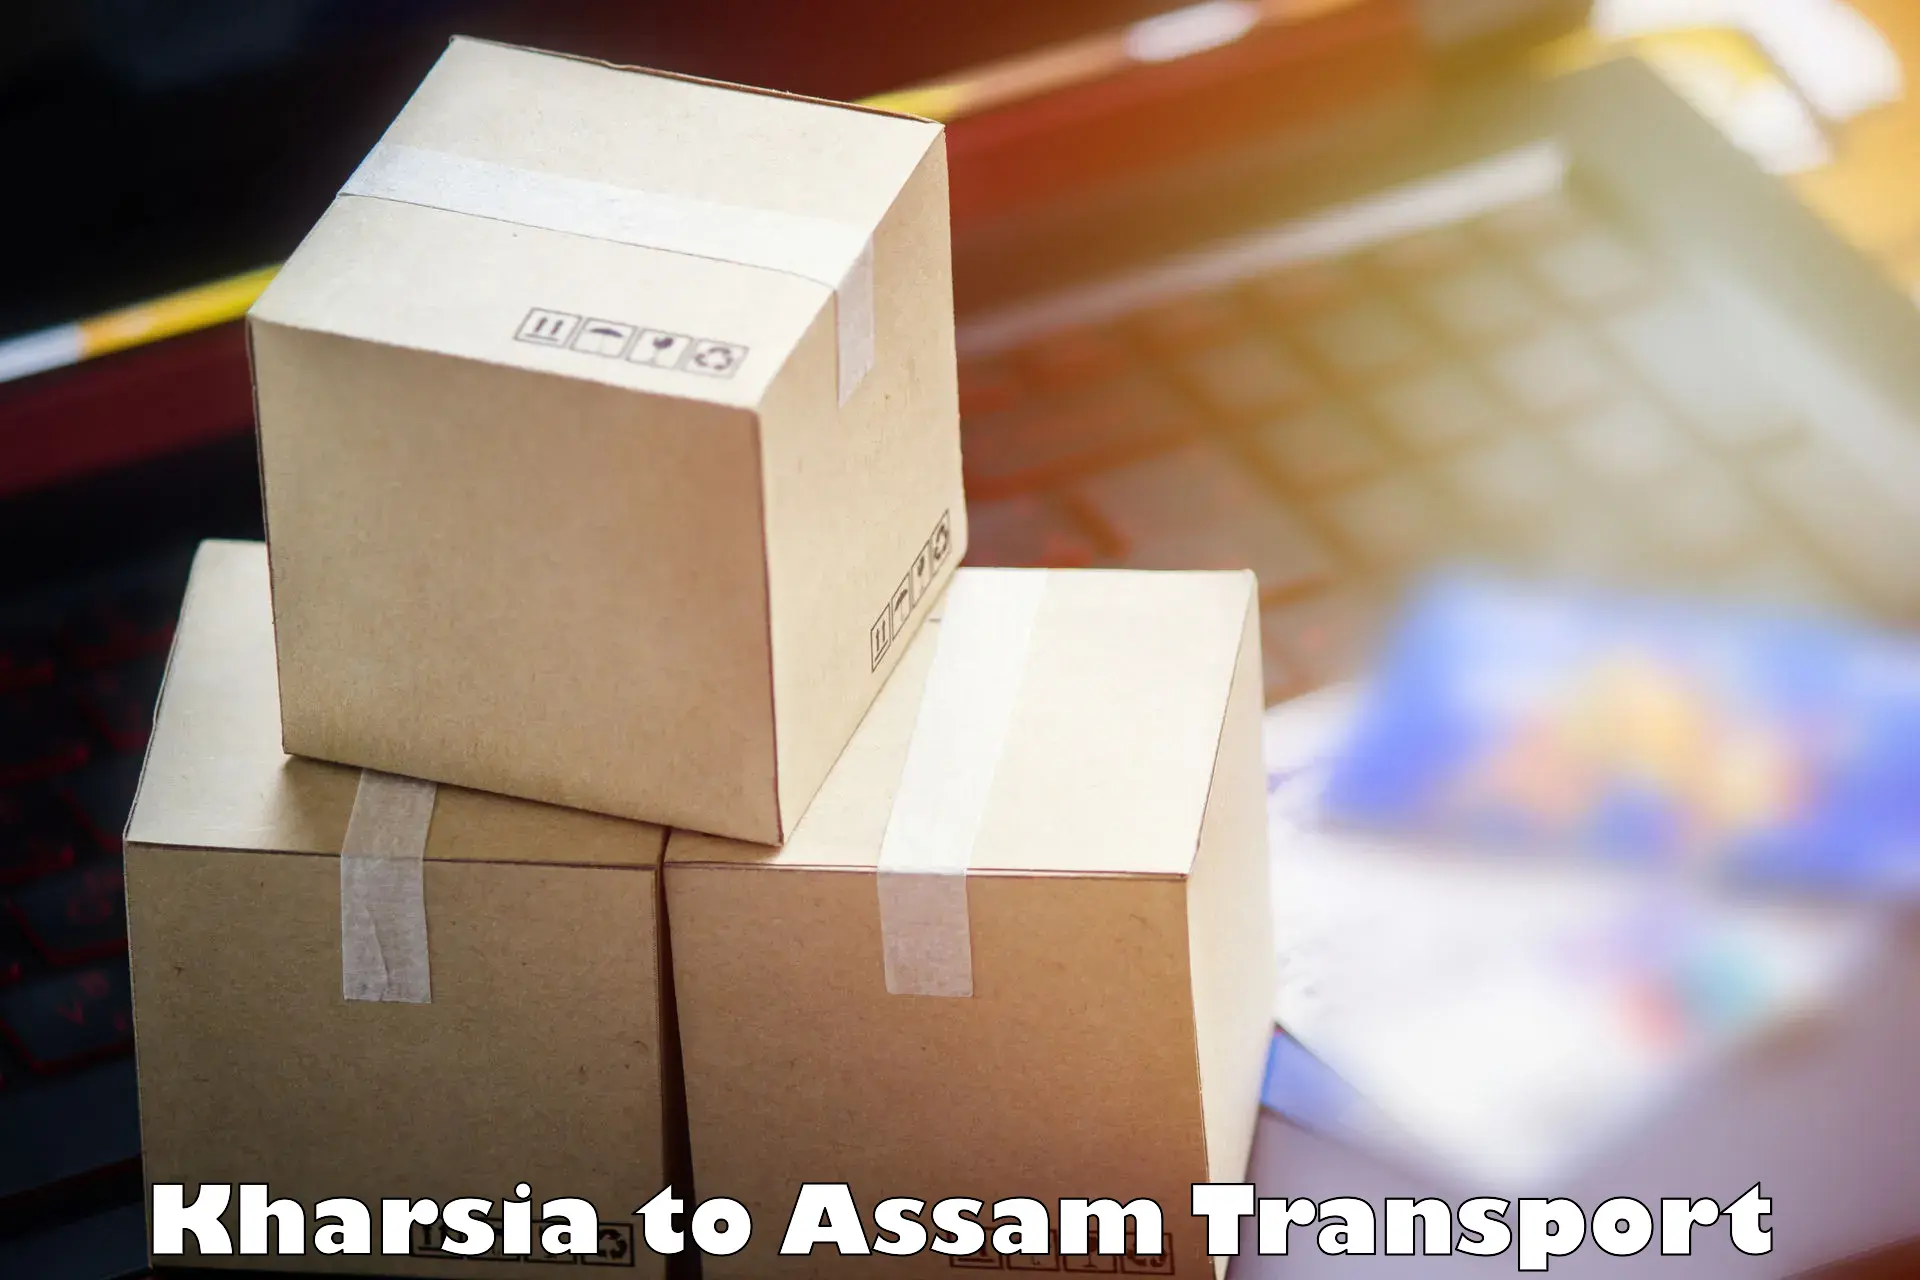 Daily parcel service transport Kharsia to Bhergaon